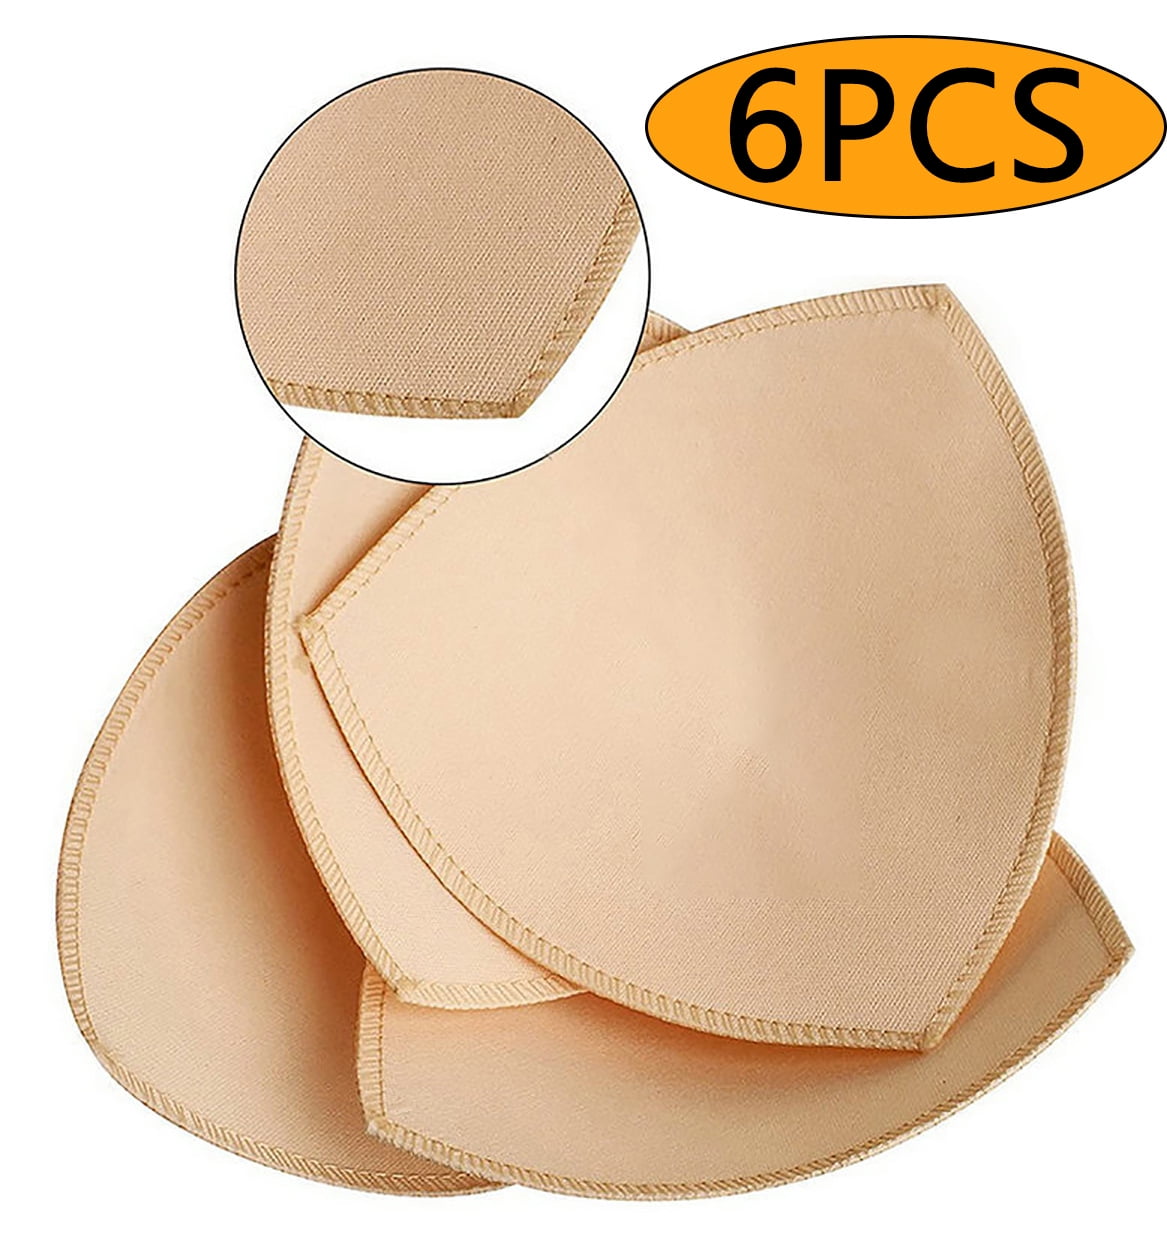 Womens Swimsuits Bra Inserts Pads Smart Cups For Wedding Dress 3 Pairs In Set Dia 4.7 inch 